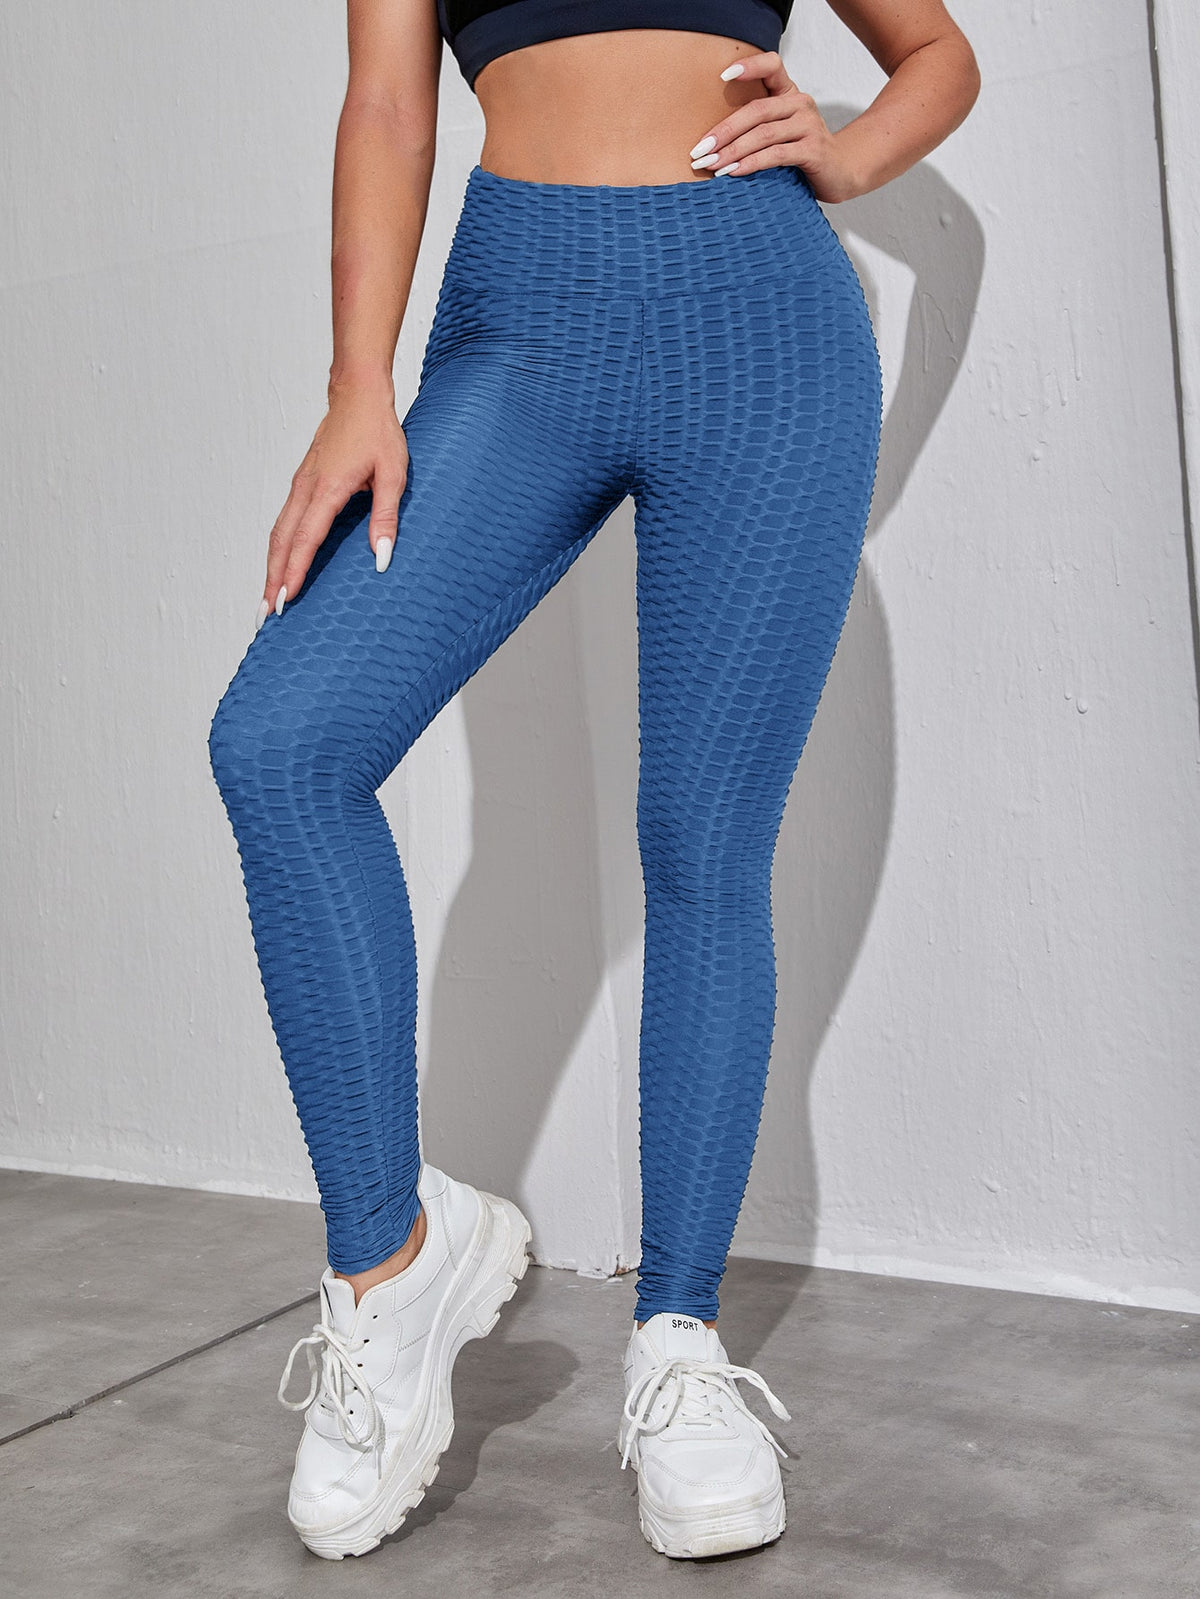 Honeycomb Textured Solid Color Sports Leggings